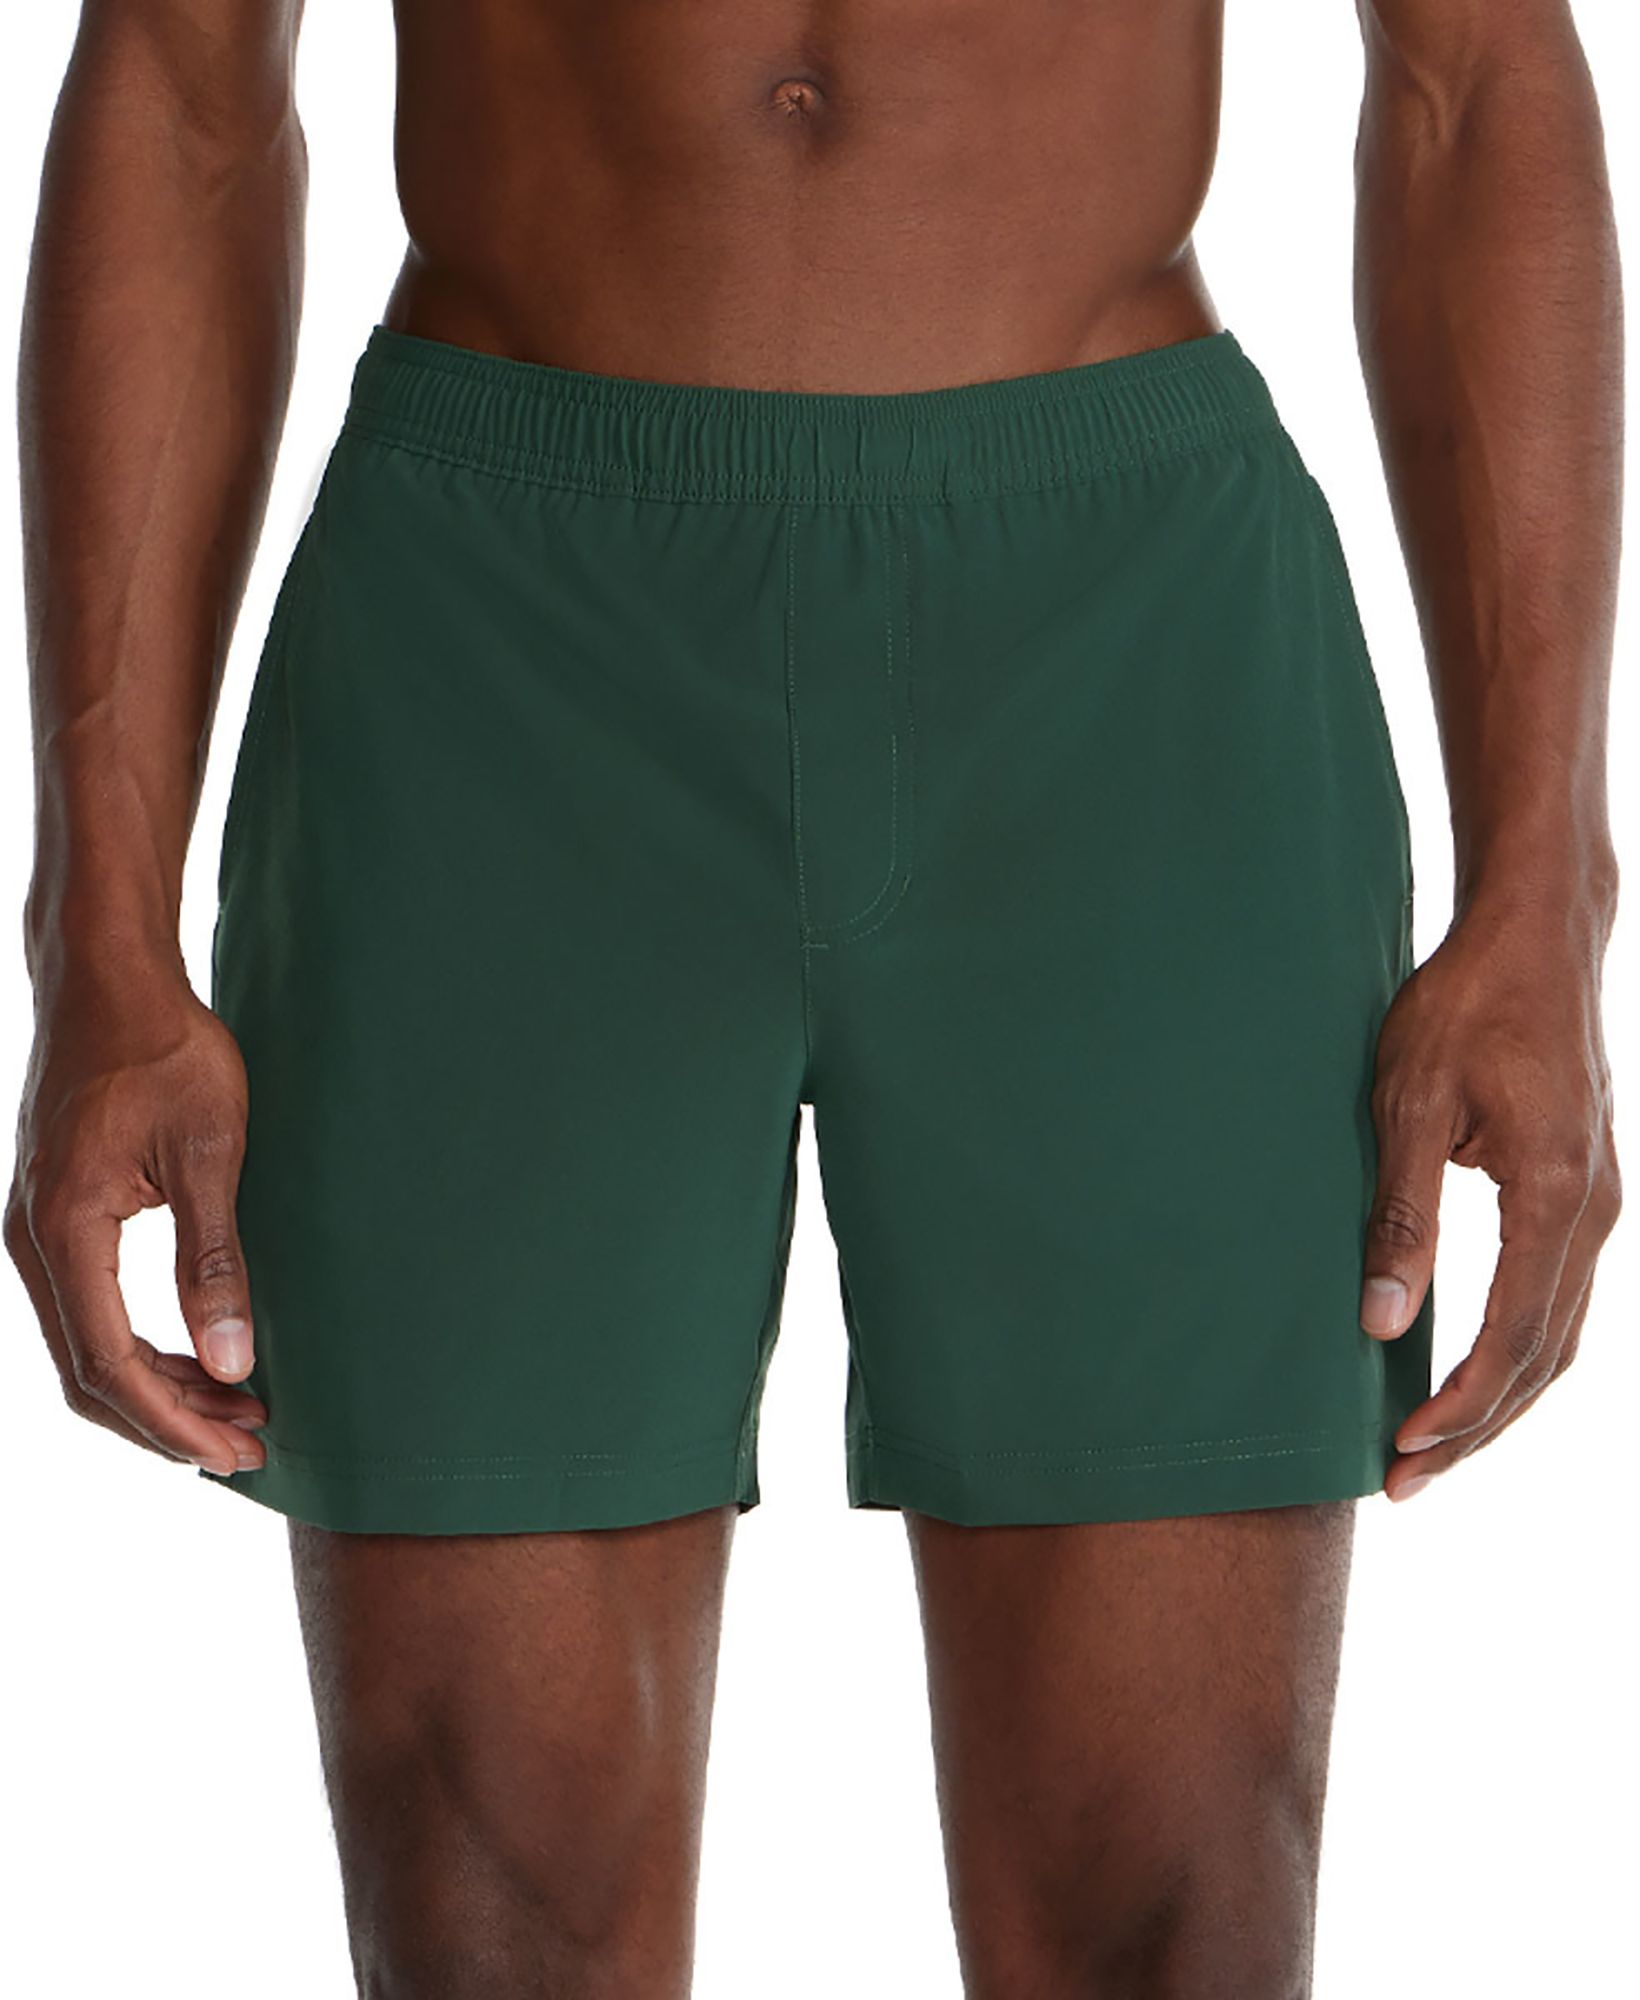 chubbies Mens 5.5 Compression Lined Shorts